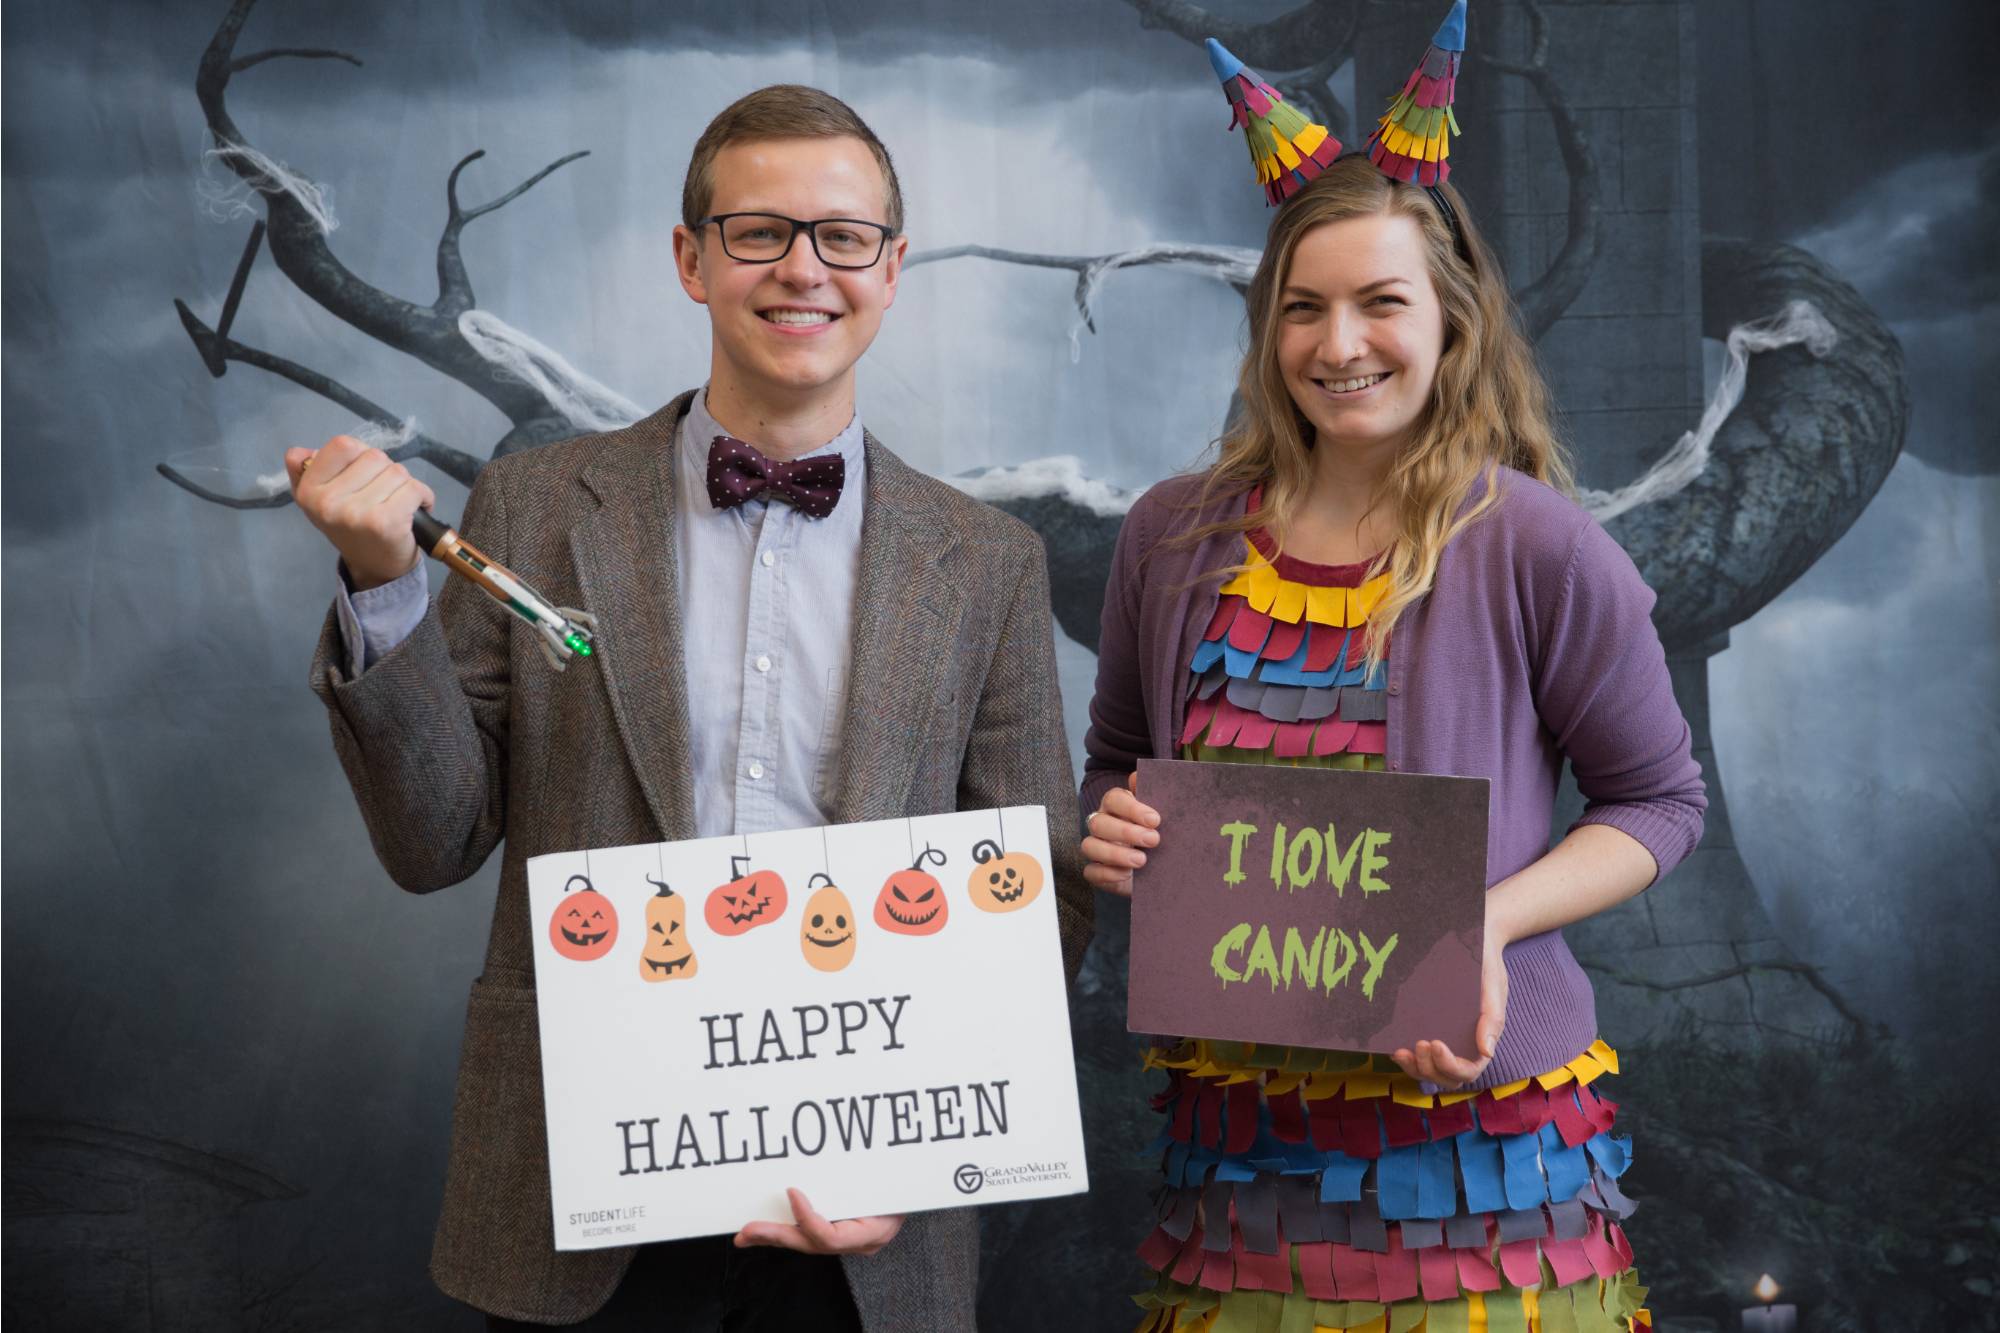 Bobby Nielsen and Kell arrand holding signs labeled "Happy Halloween" & "I love candy"